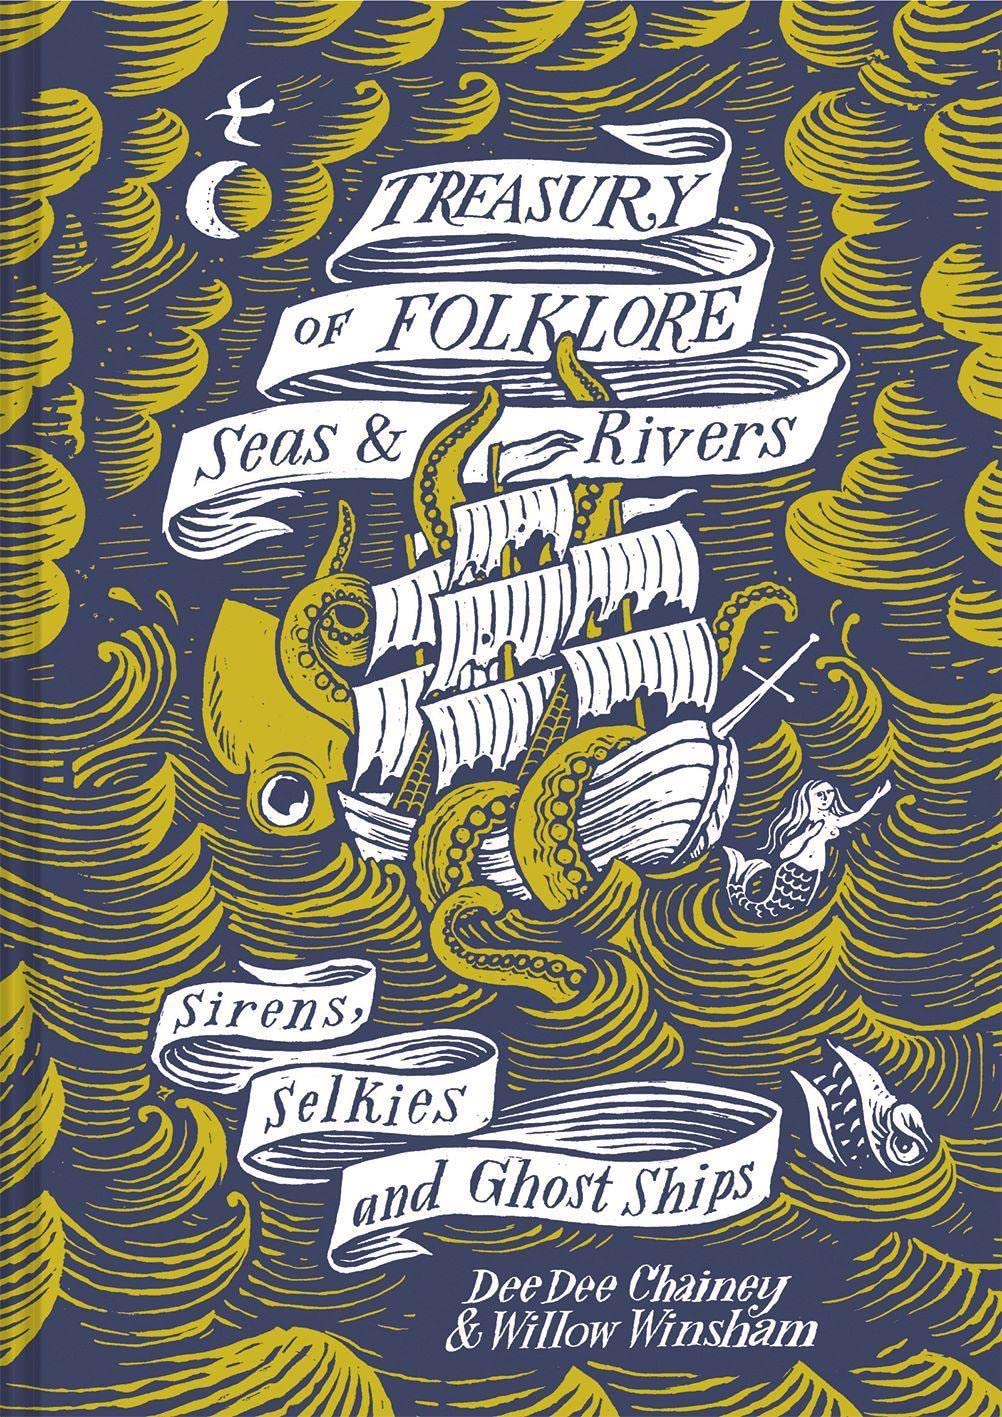 Treasury of Folklore - Seas and Rivers | Dee Dee Chainey, Willow Winsham